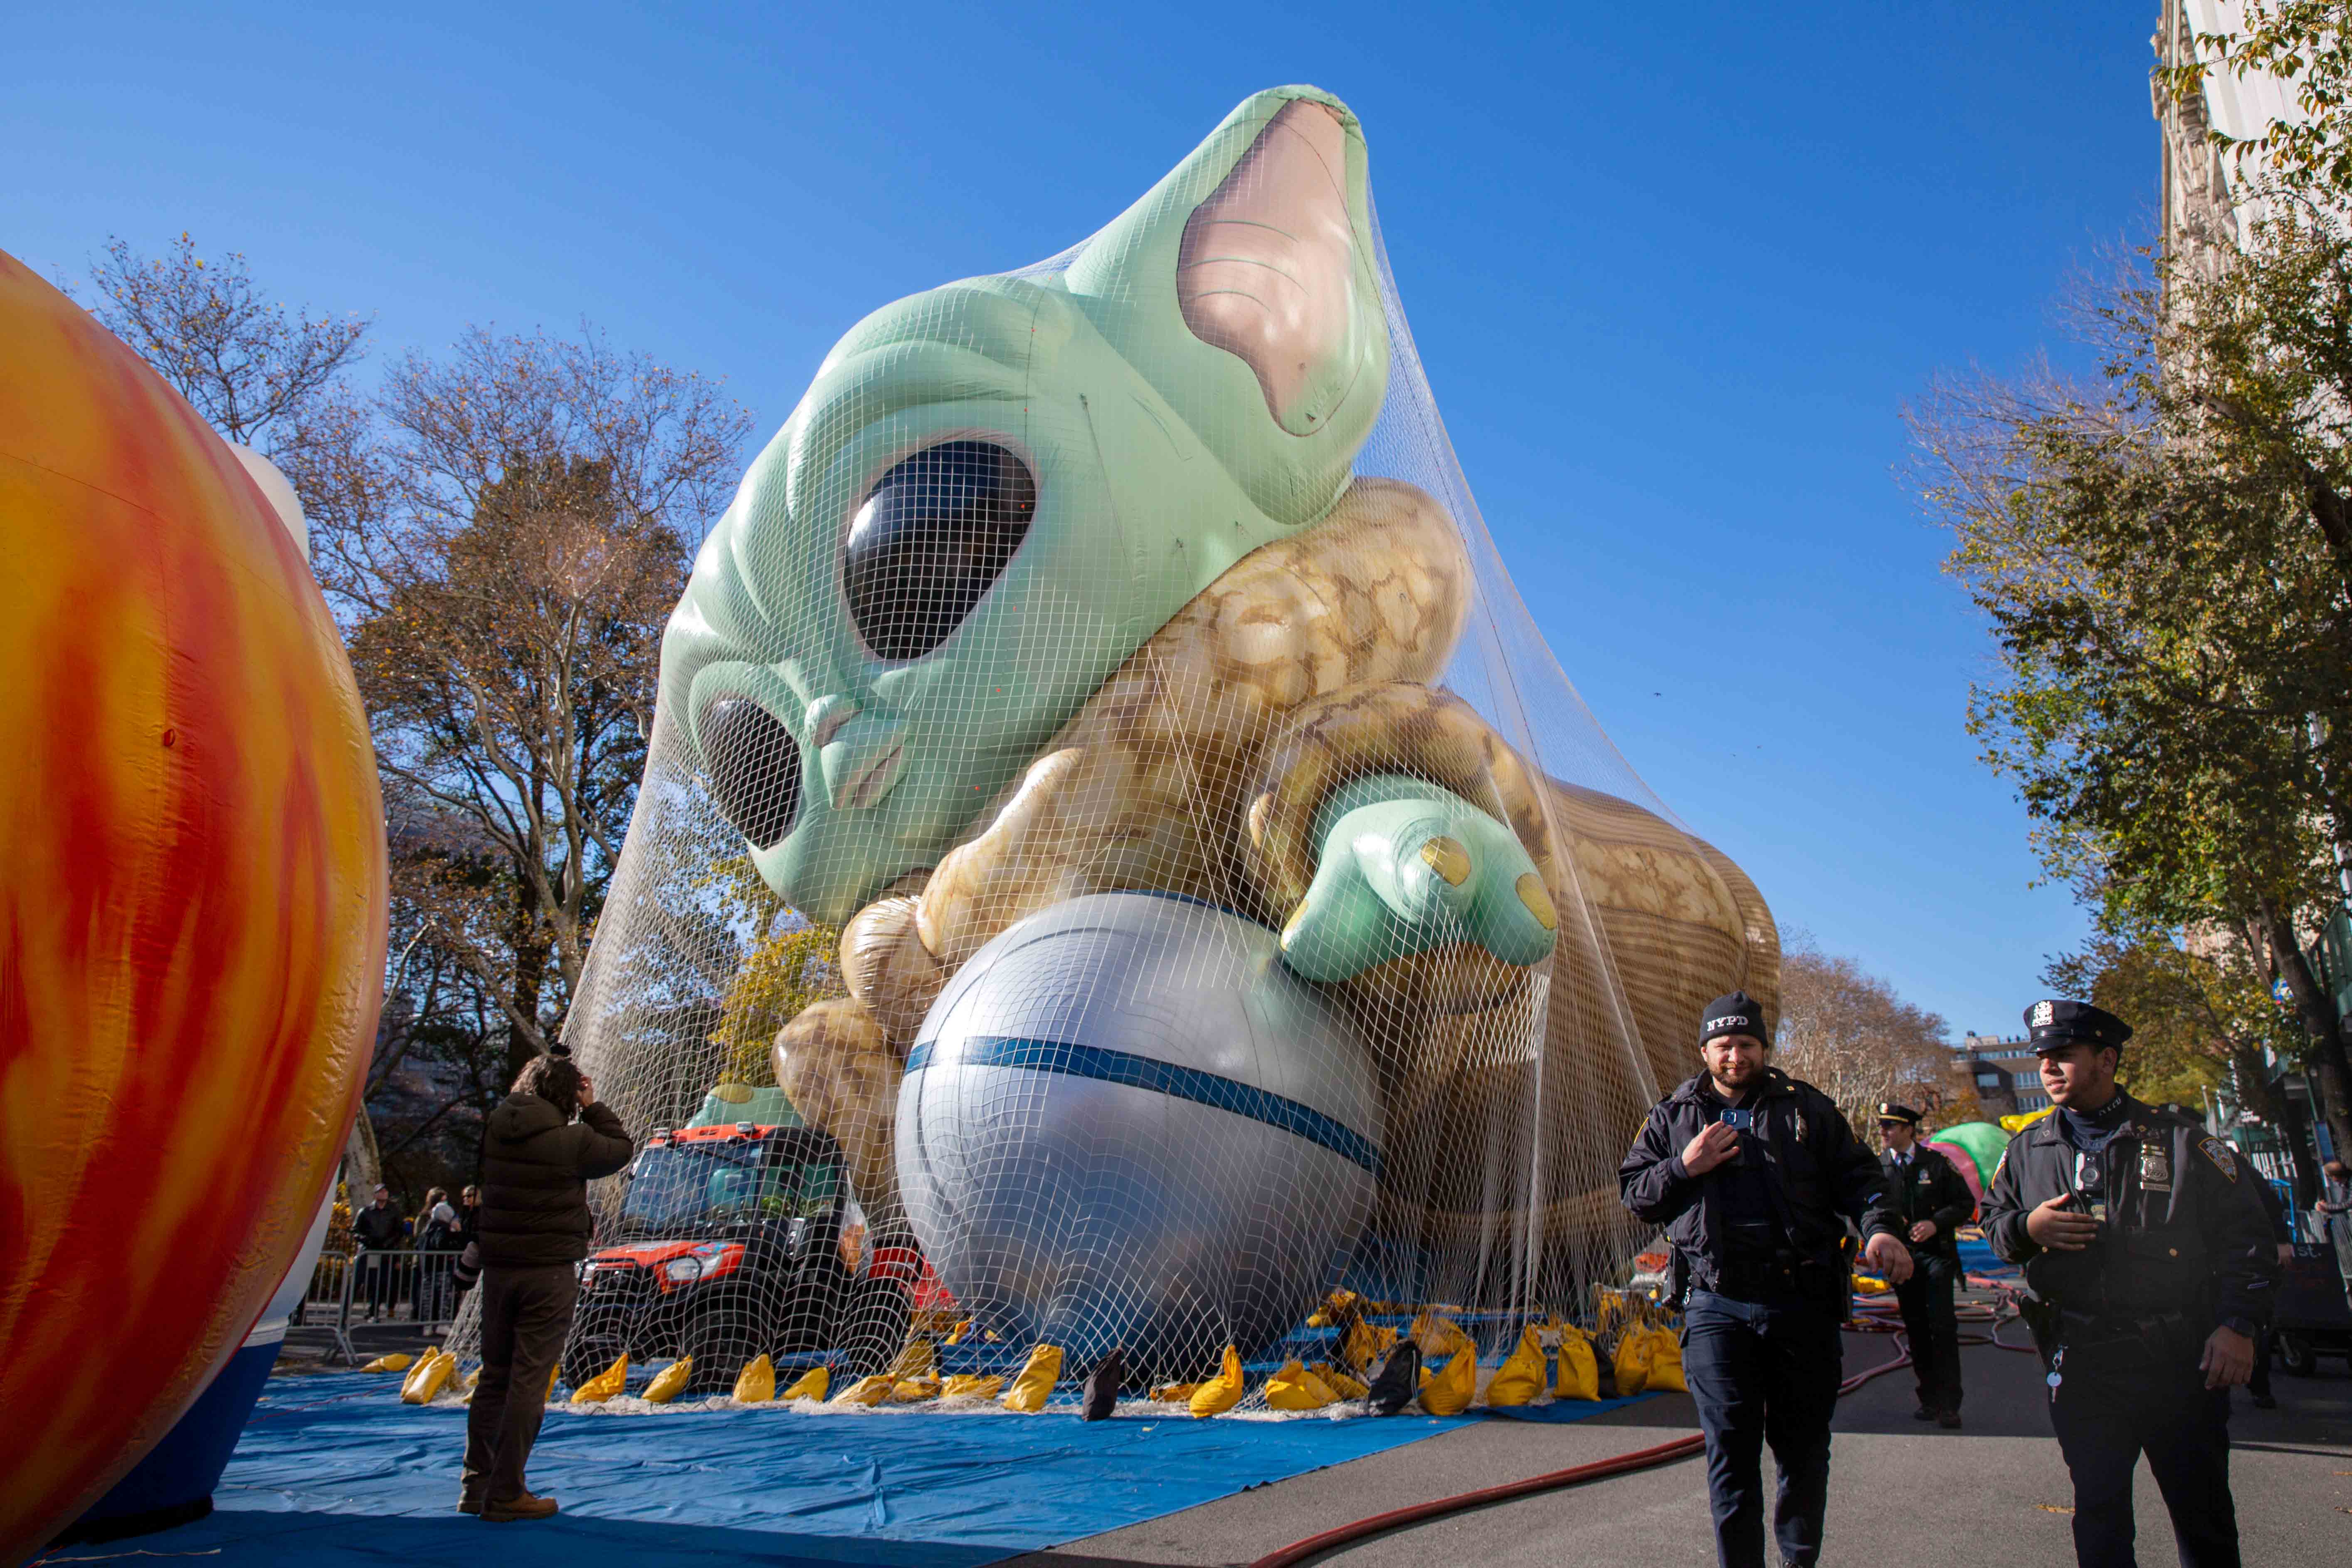 Police walk by an inflated helium balloon of Grogu, also known as Baby Yoda, from the Star Wars show The Mandalorian, Wednesday, Nov. 24, 2021, in New York, as the balloon is readied for the Macy